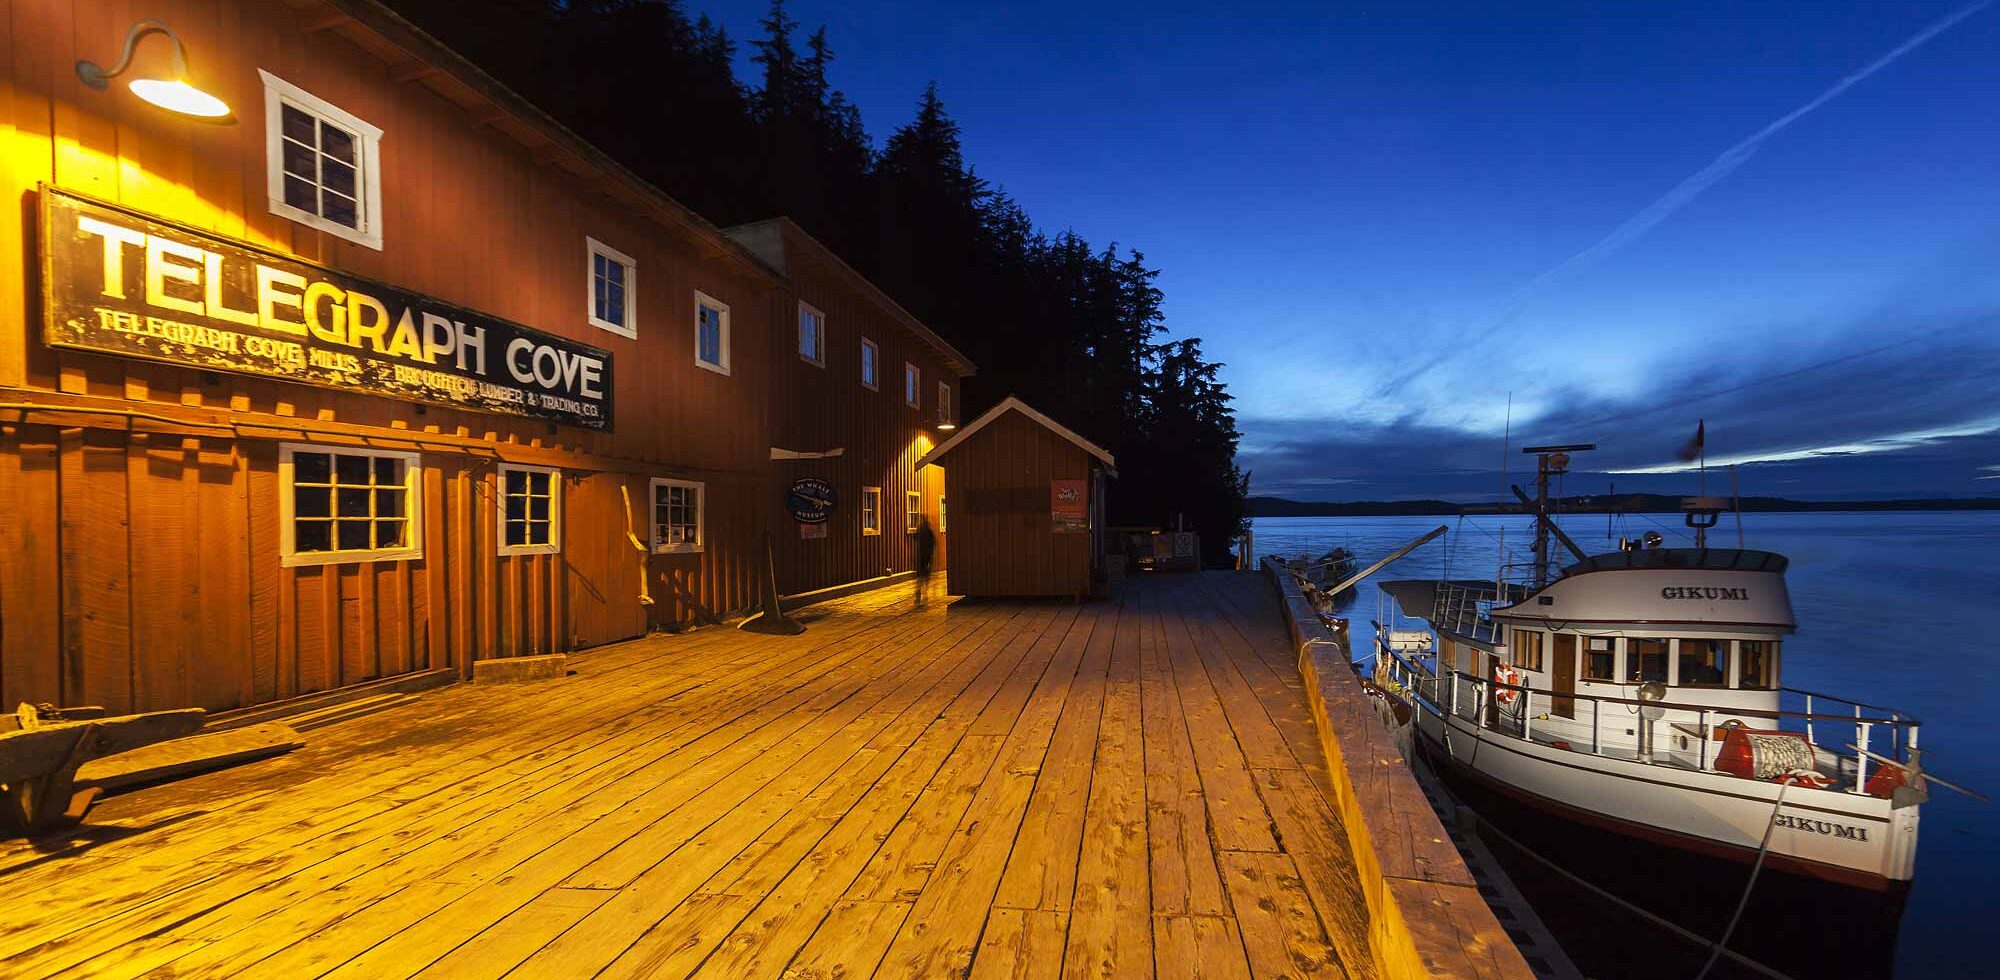 The Historic Whale Museum building and the origianl whale watching boat, the Gikumi at Telegraph Cove add to the appeal of this popular tourist destination.